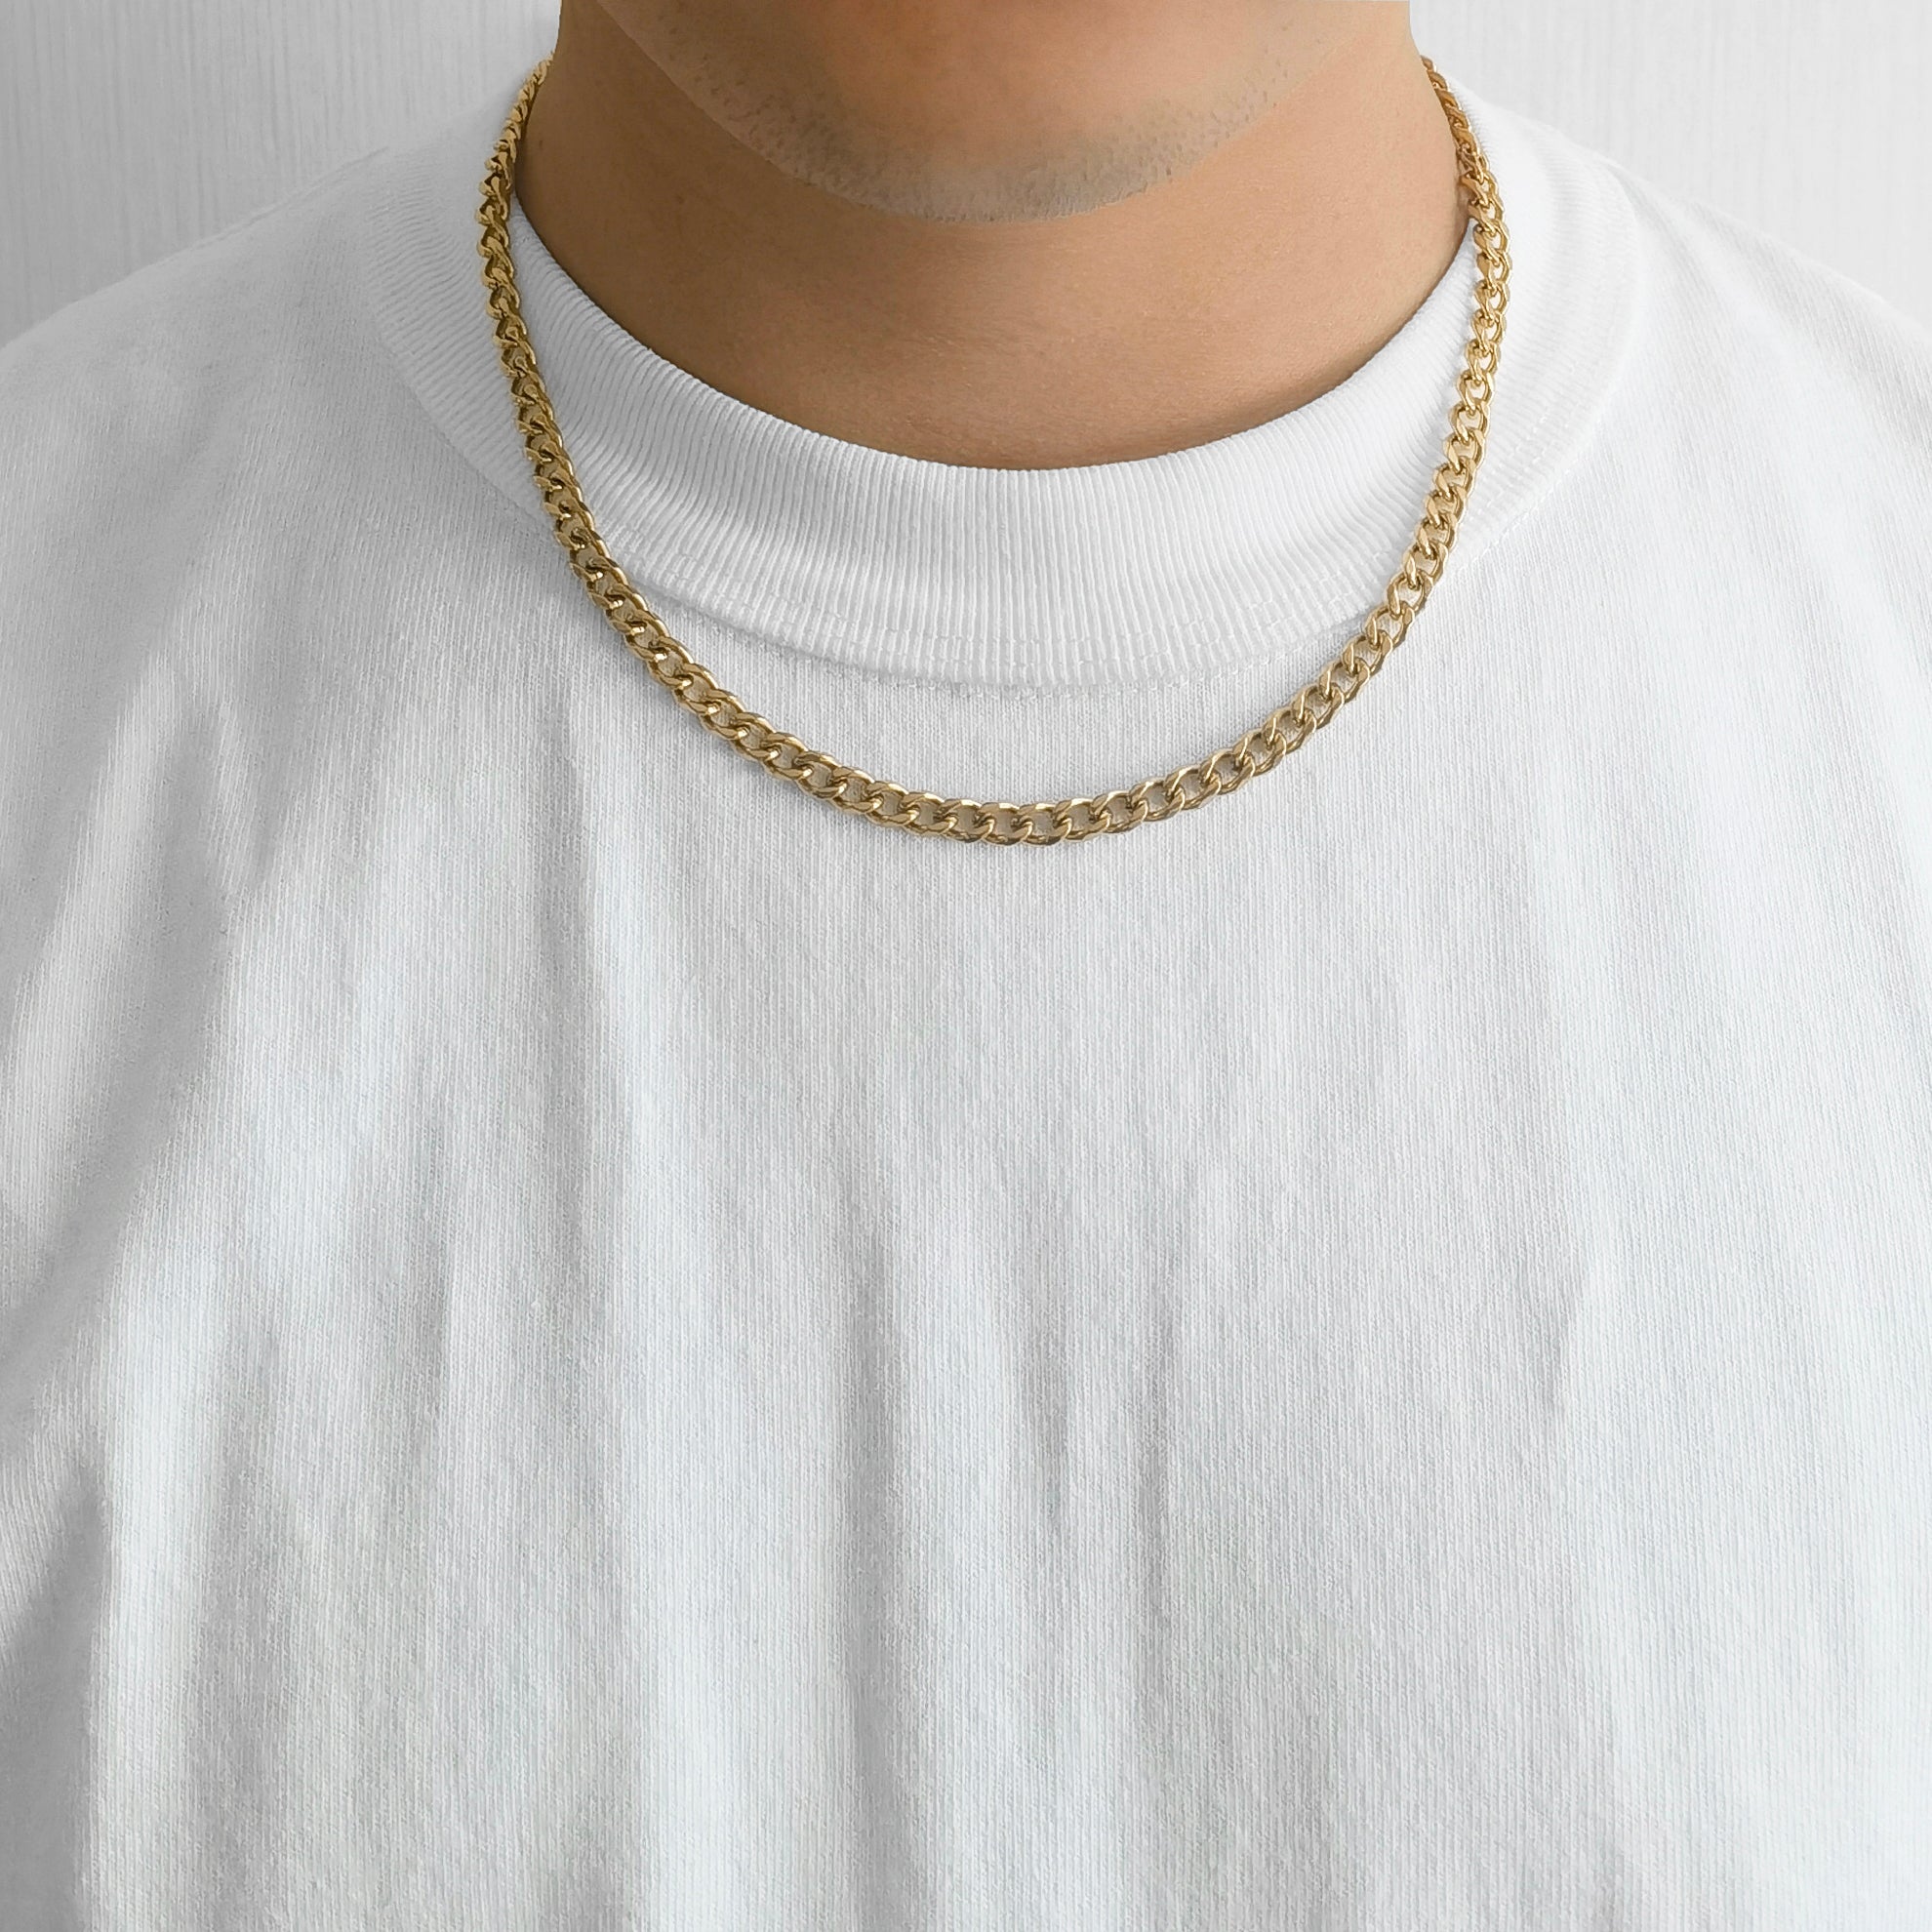 Men's 6mm Gold Plated Steel 18-24 Inch Curb Chain Necklace